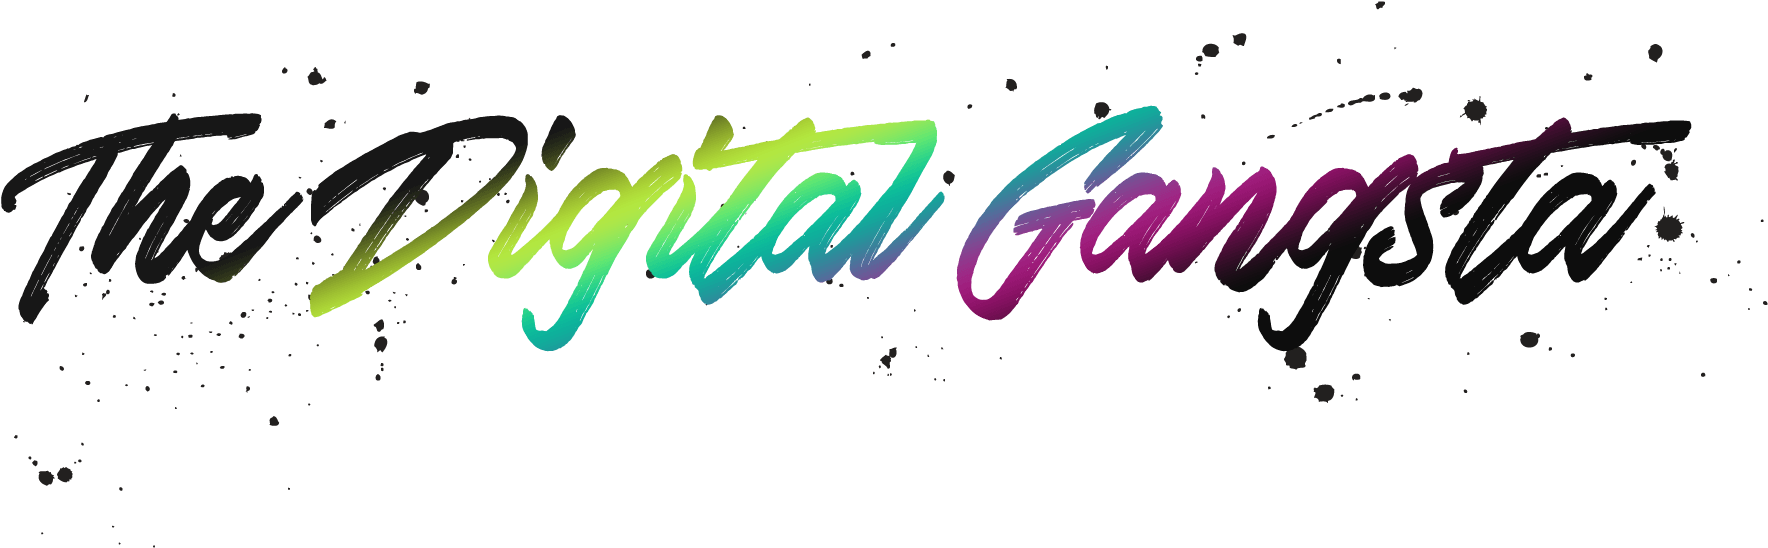 A Colorful Text On A Black Background